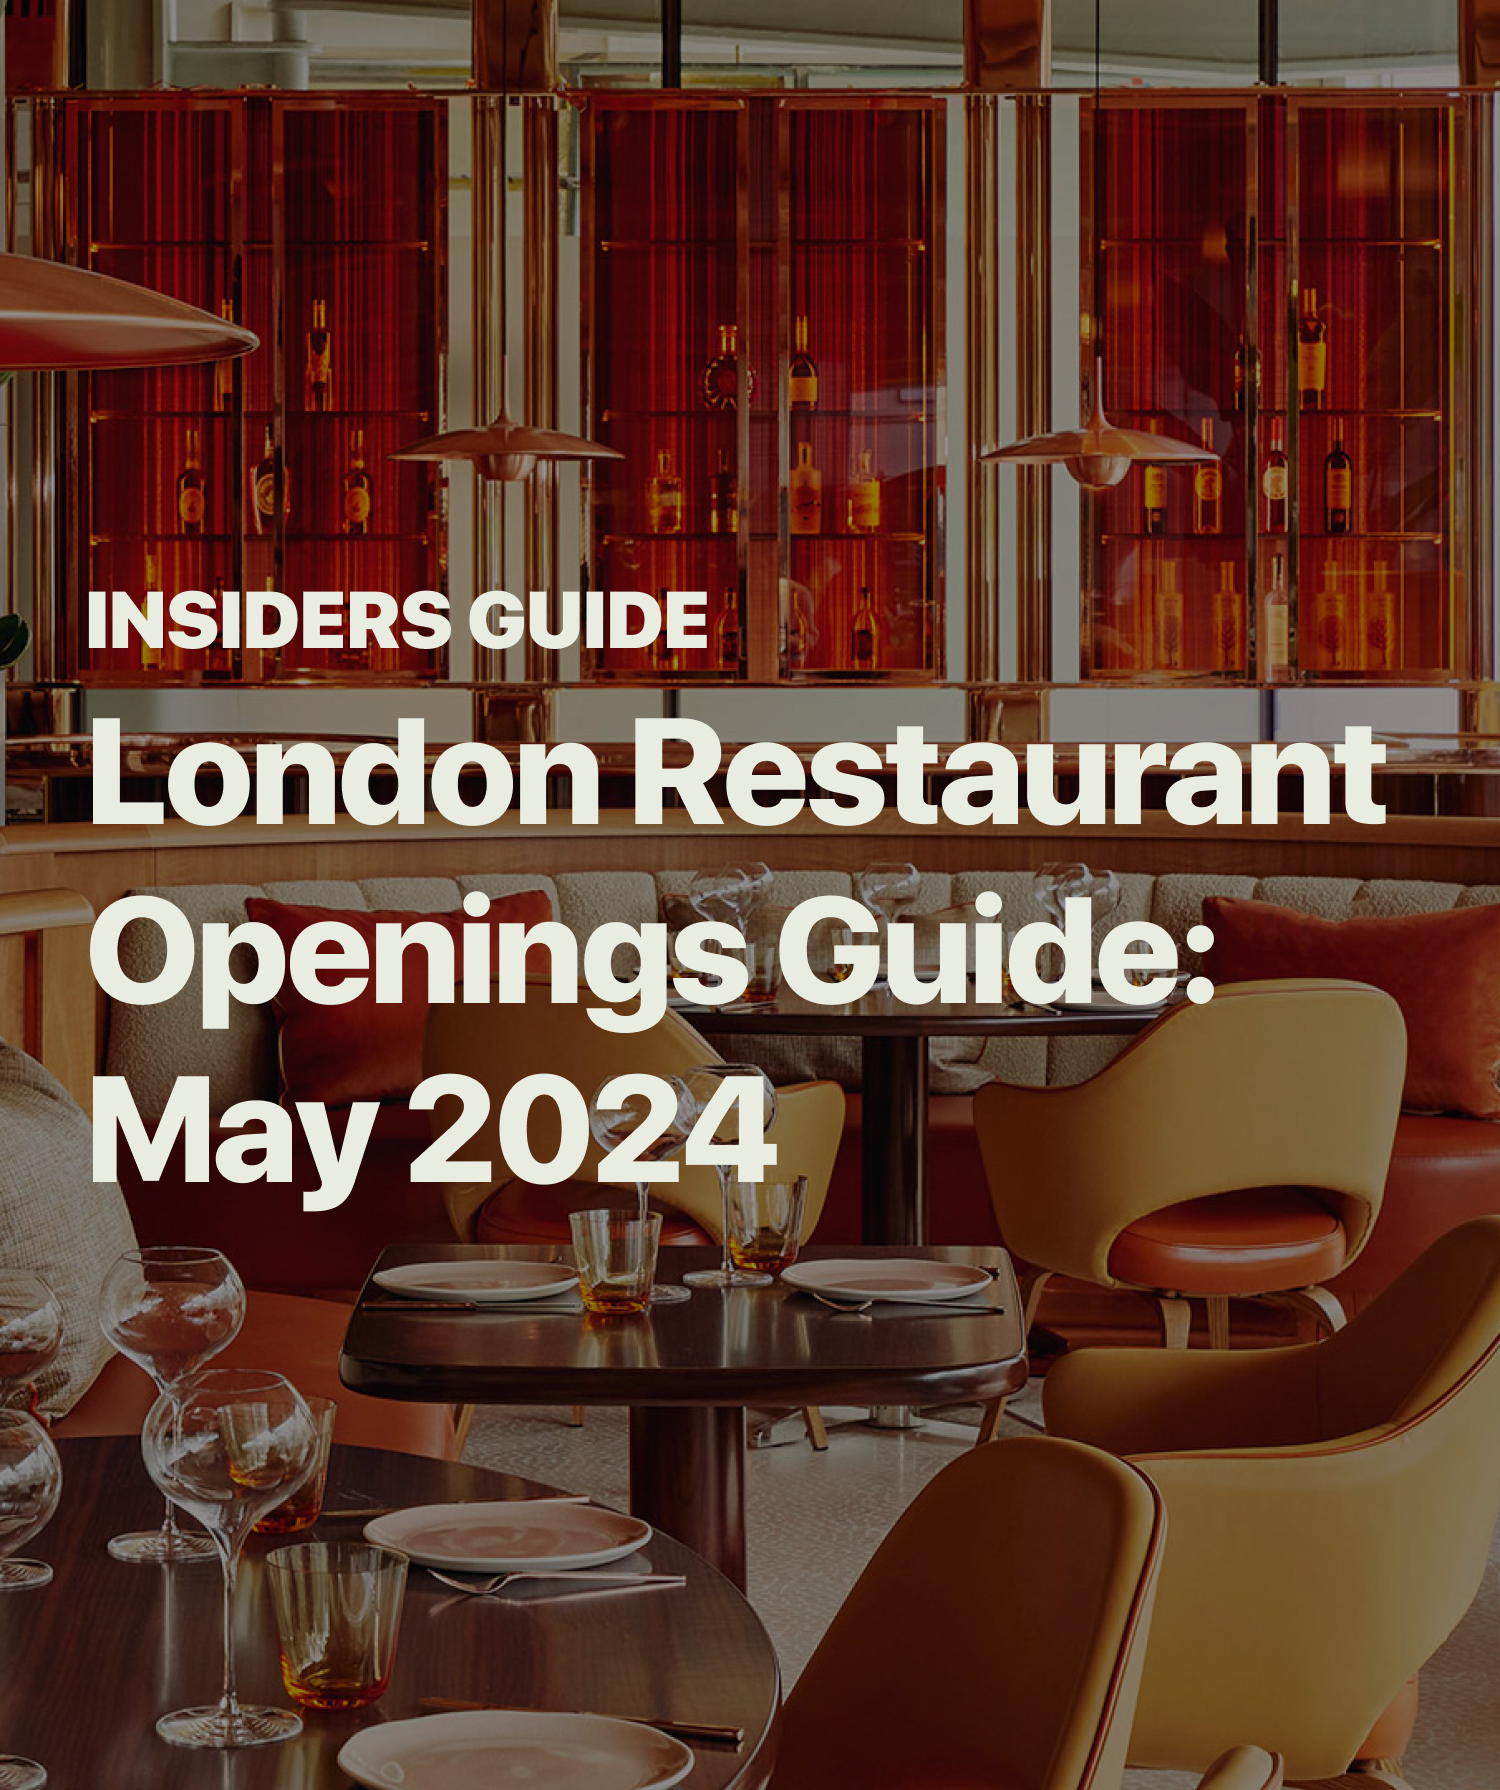 The Best New Restaurant Openings in London: Ultimate Guide [May 2024]